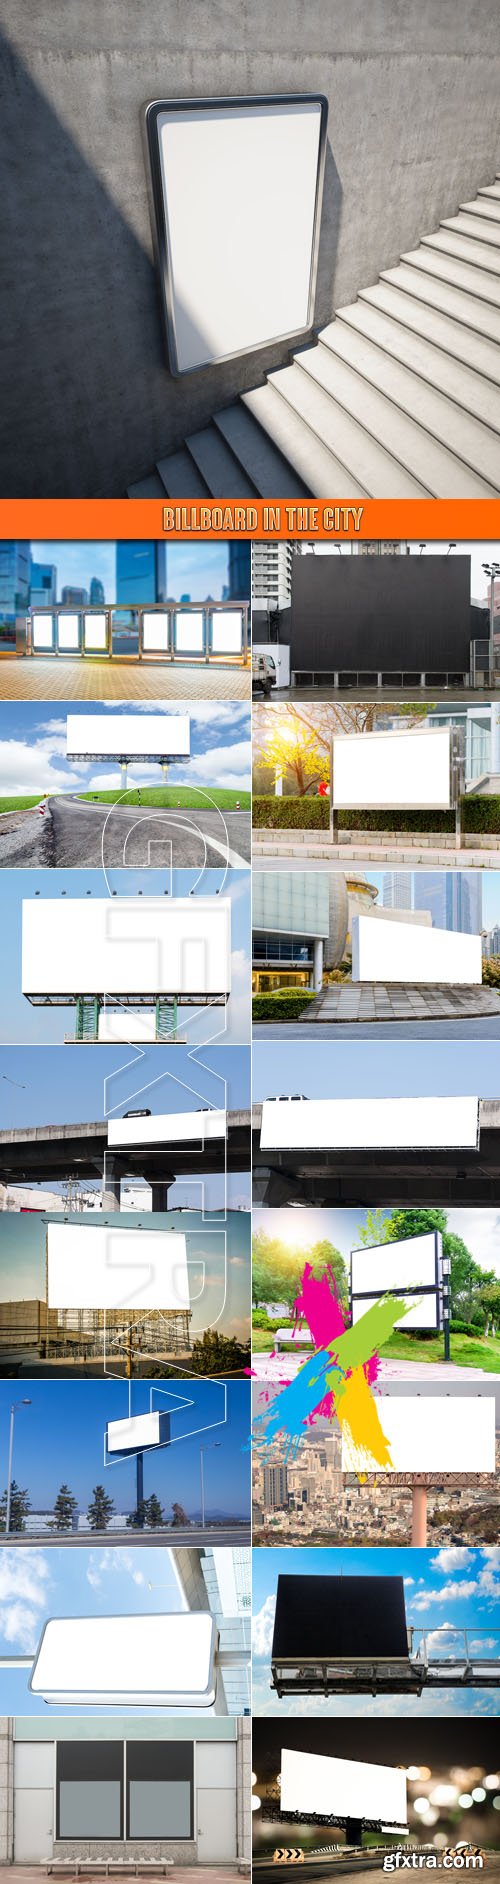 Billboard in the city - Stock Photos